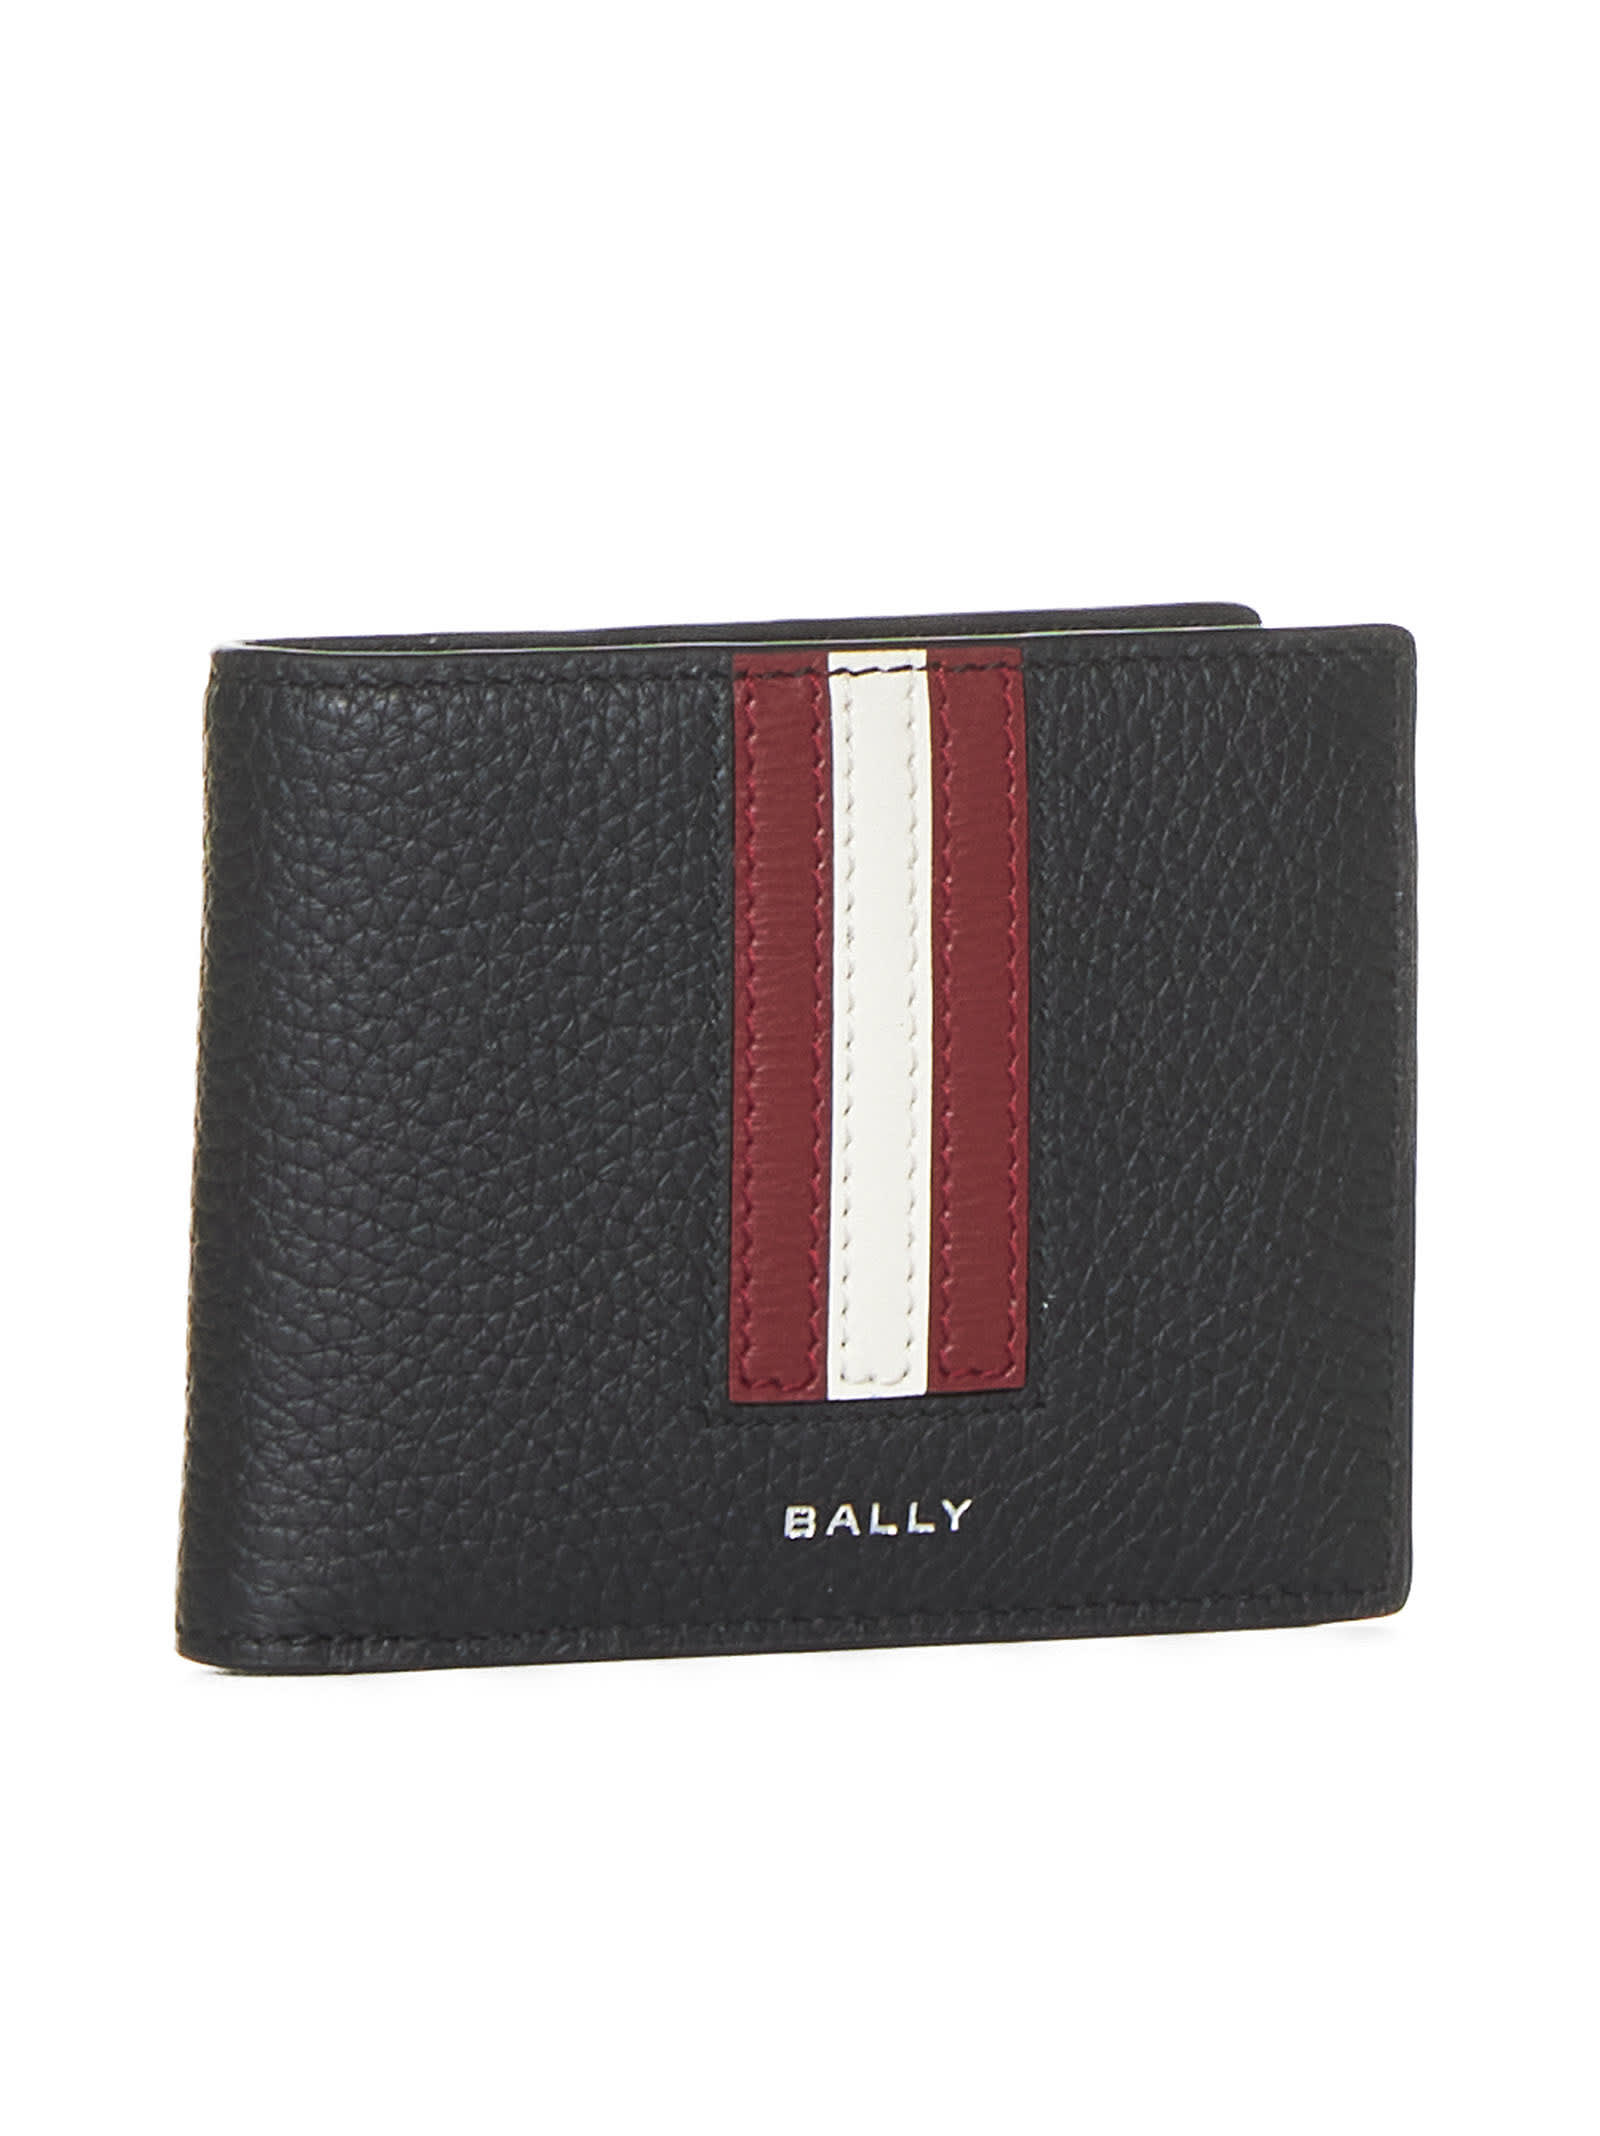 Shop Bally Wallet In Black/red+pall